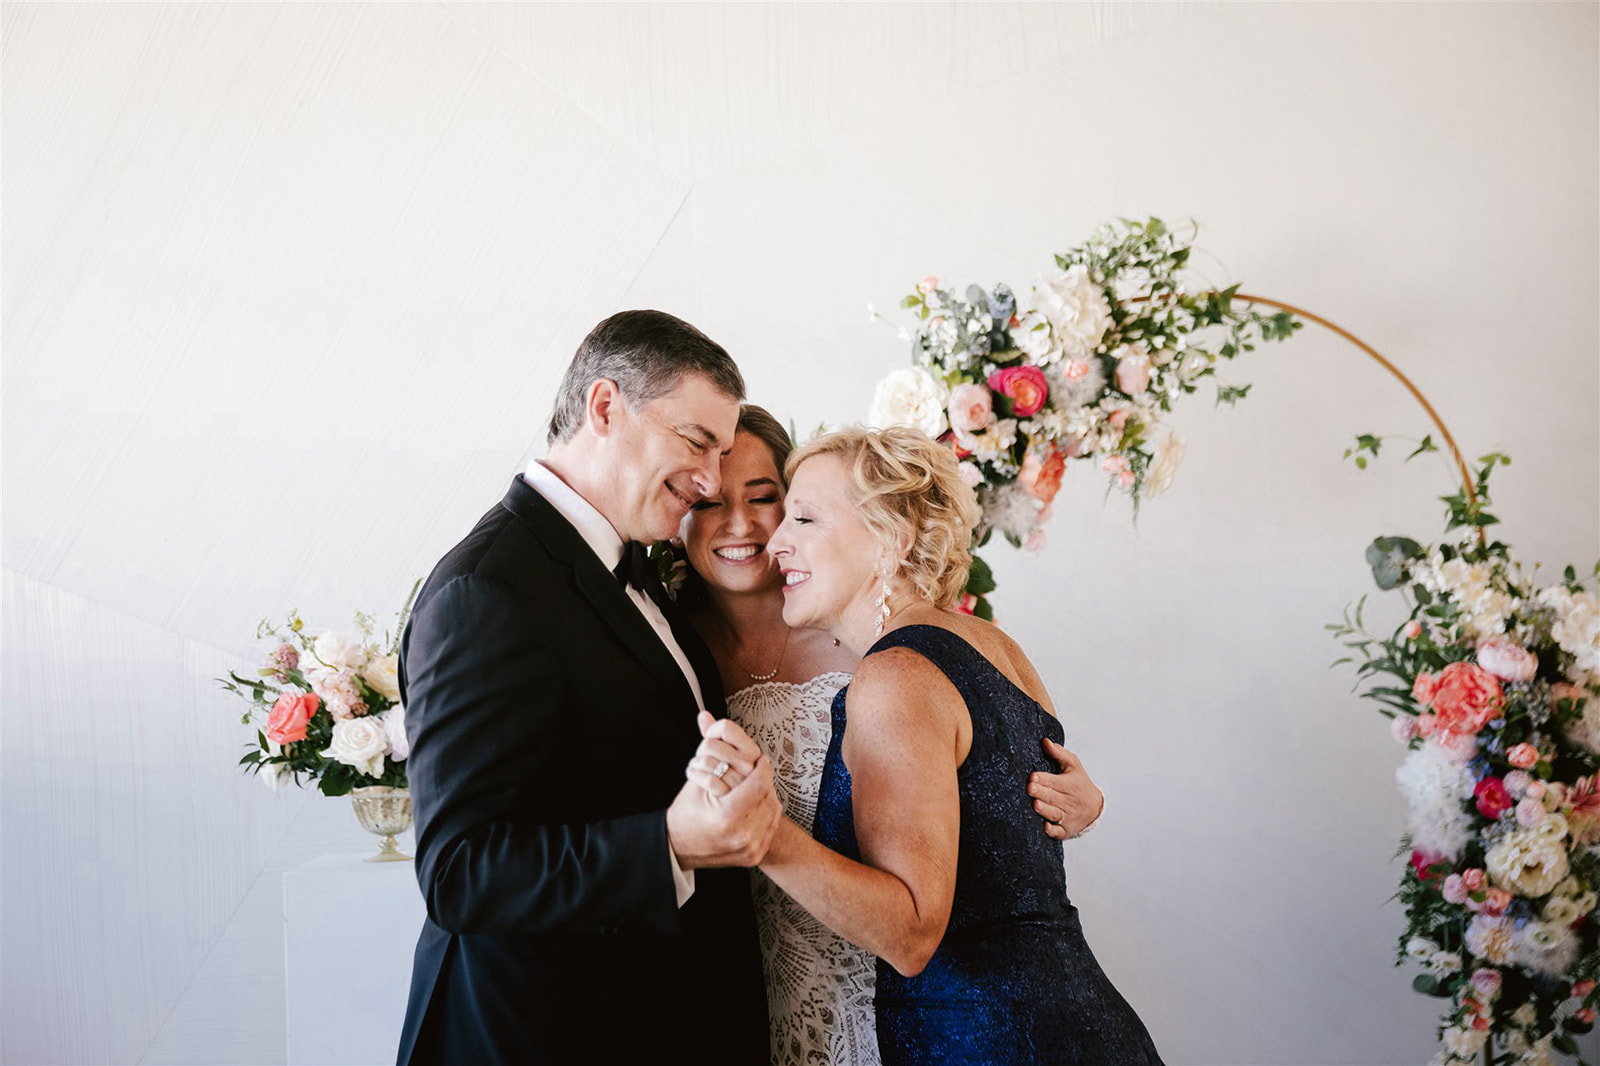 Capturing an emotional moment: The bride shares a heartfelt first look with her parents at Walden Chicago, capturing the